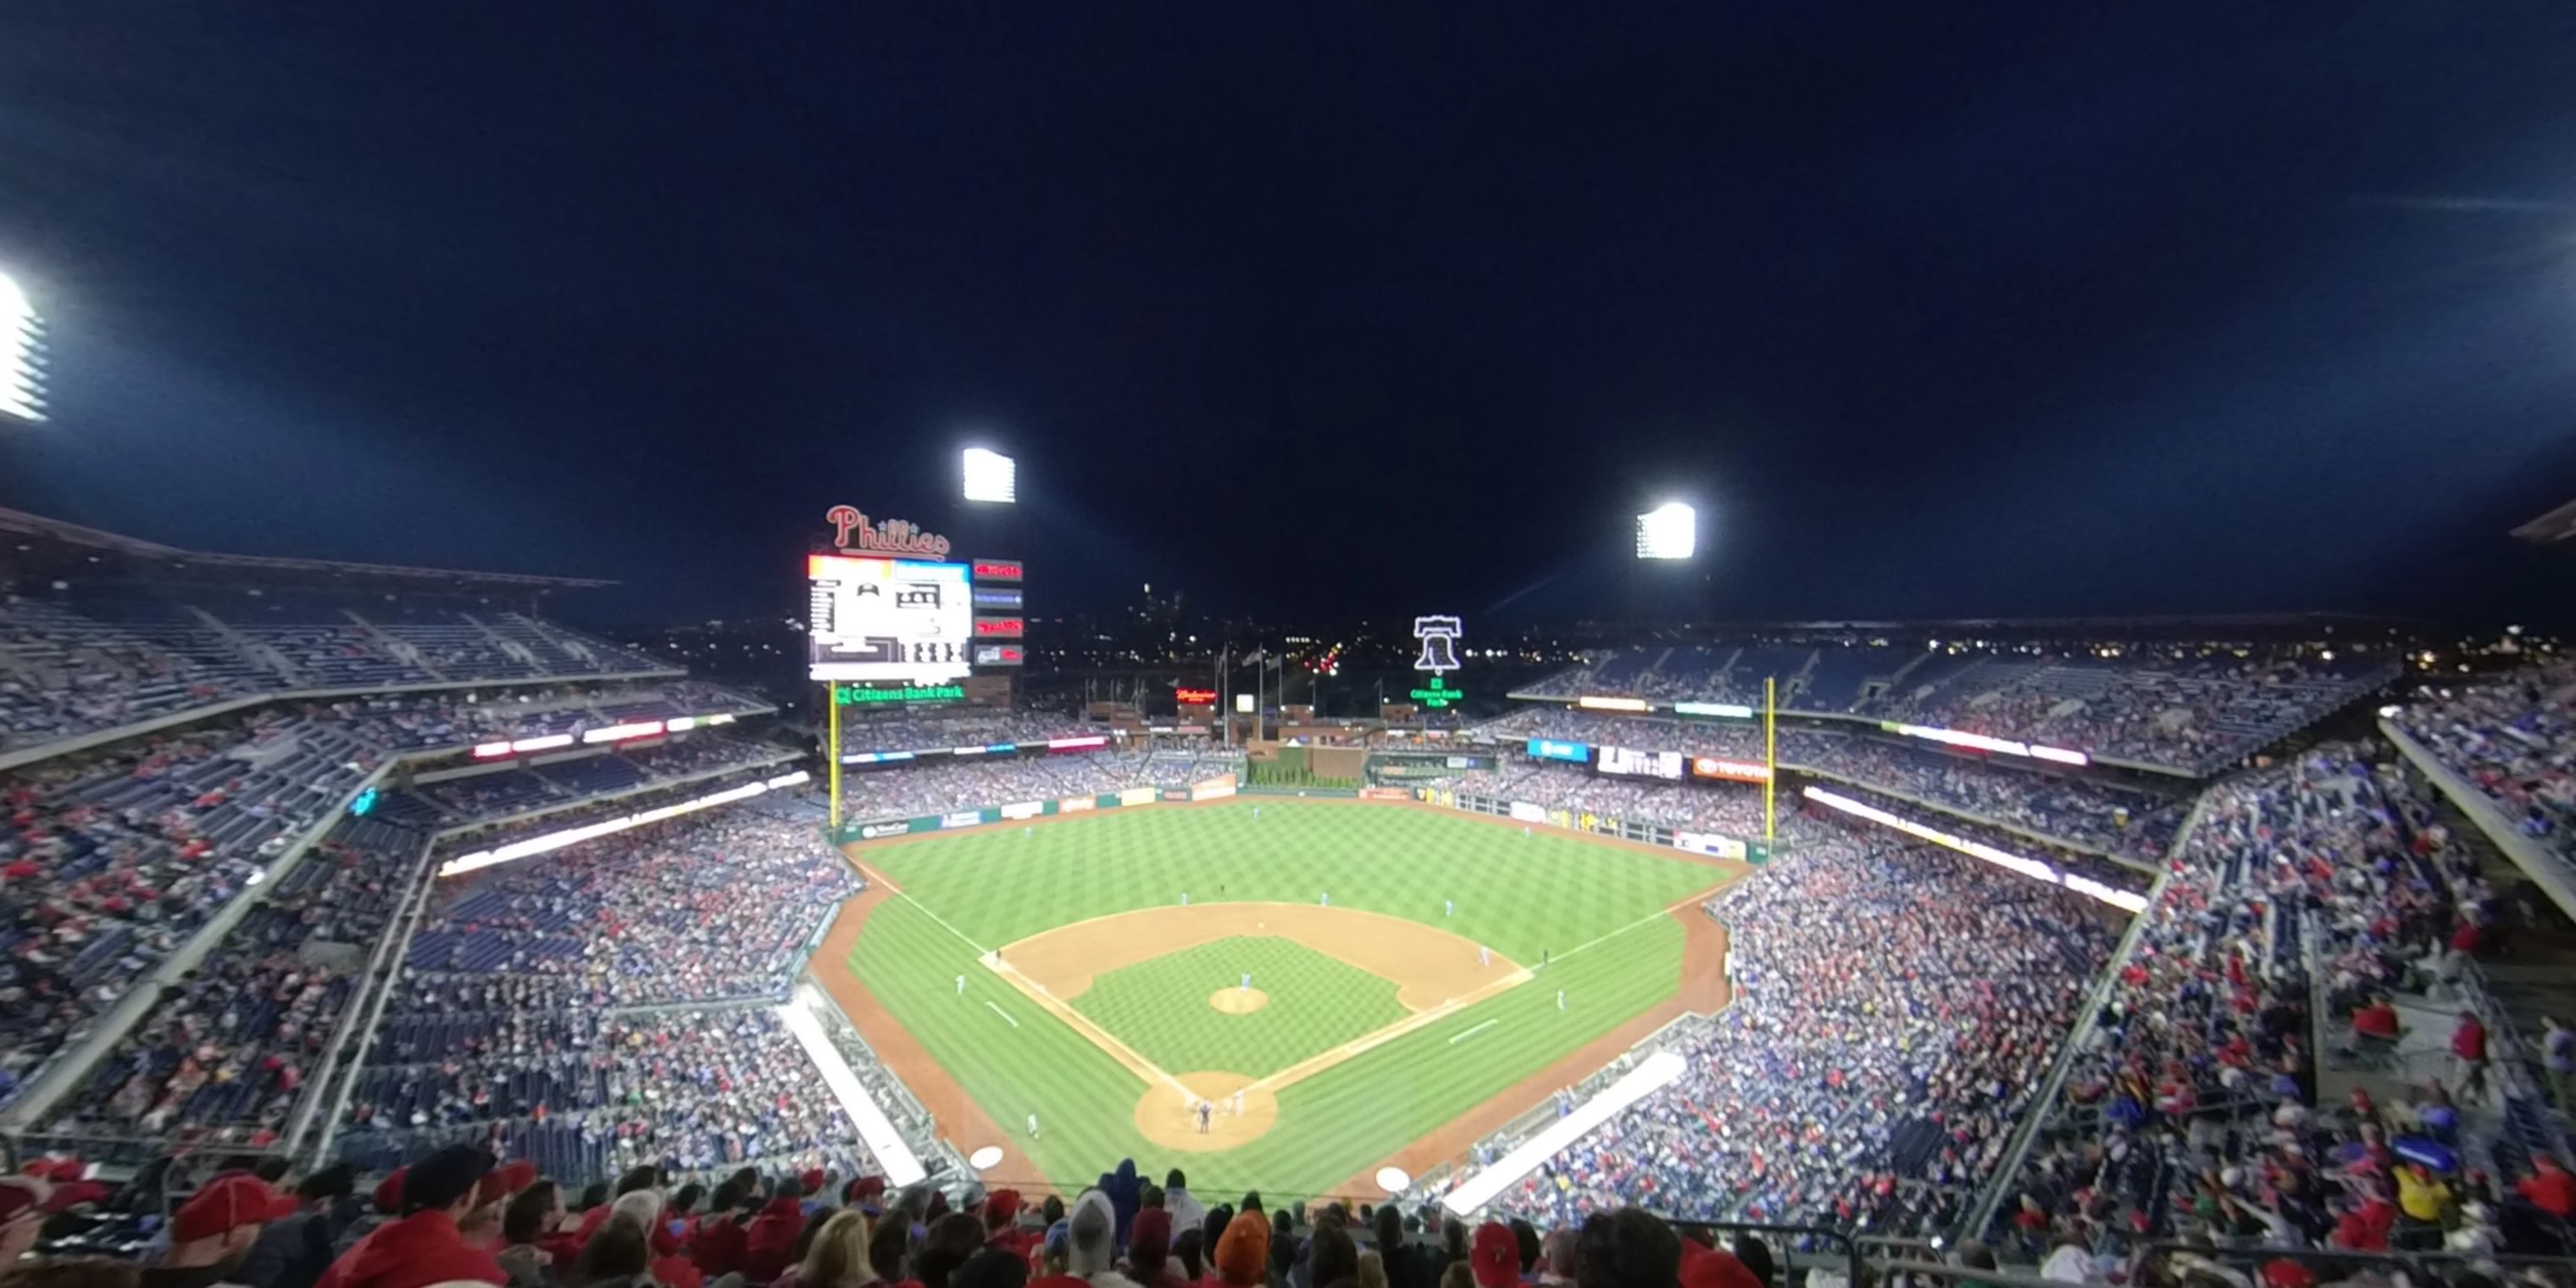 section 419 panoramic seat view  for baseball - citizens bank park